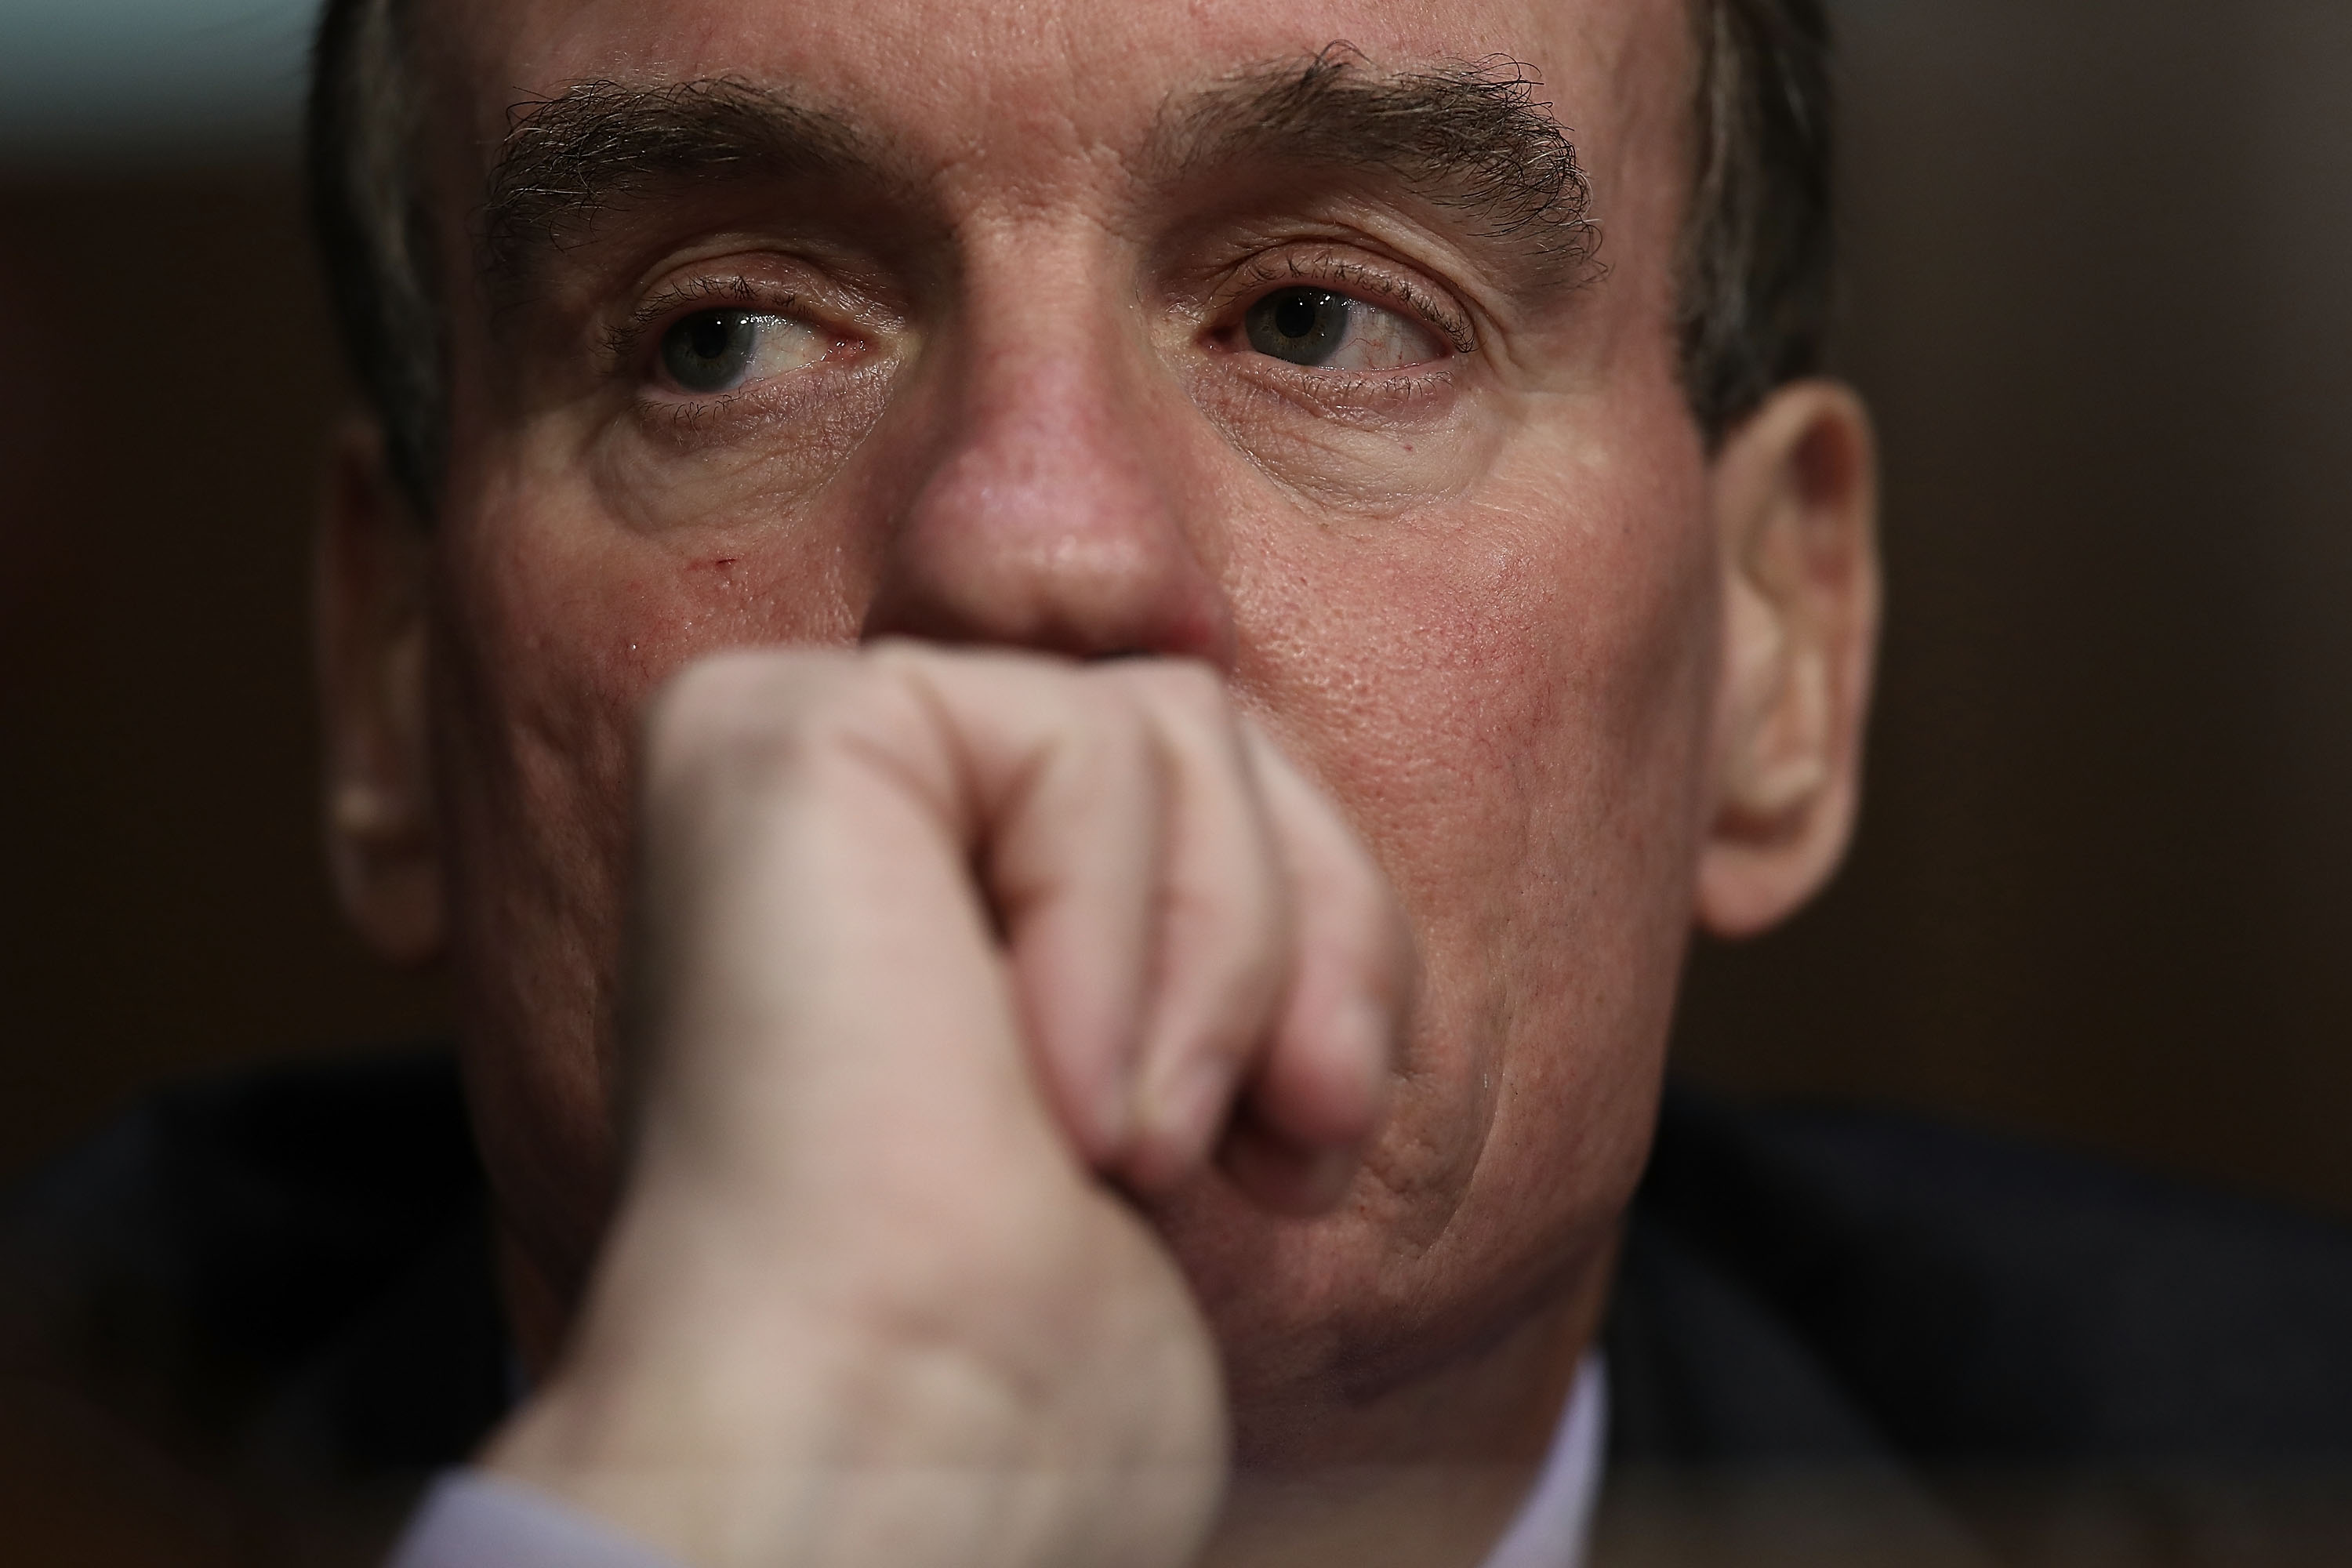 Sen. Mark Warner (D-VA) listens to testimony from U.S. Federal Reserve Board Chairwoman Janet Yellen during Yellen's testimony before the Senate Banking, Housing and Urban Affairs Committee in Washington, D.C., on June 21, 2016. (Win McNamee—Getty Images)